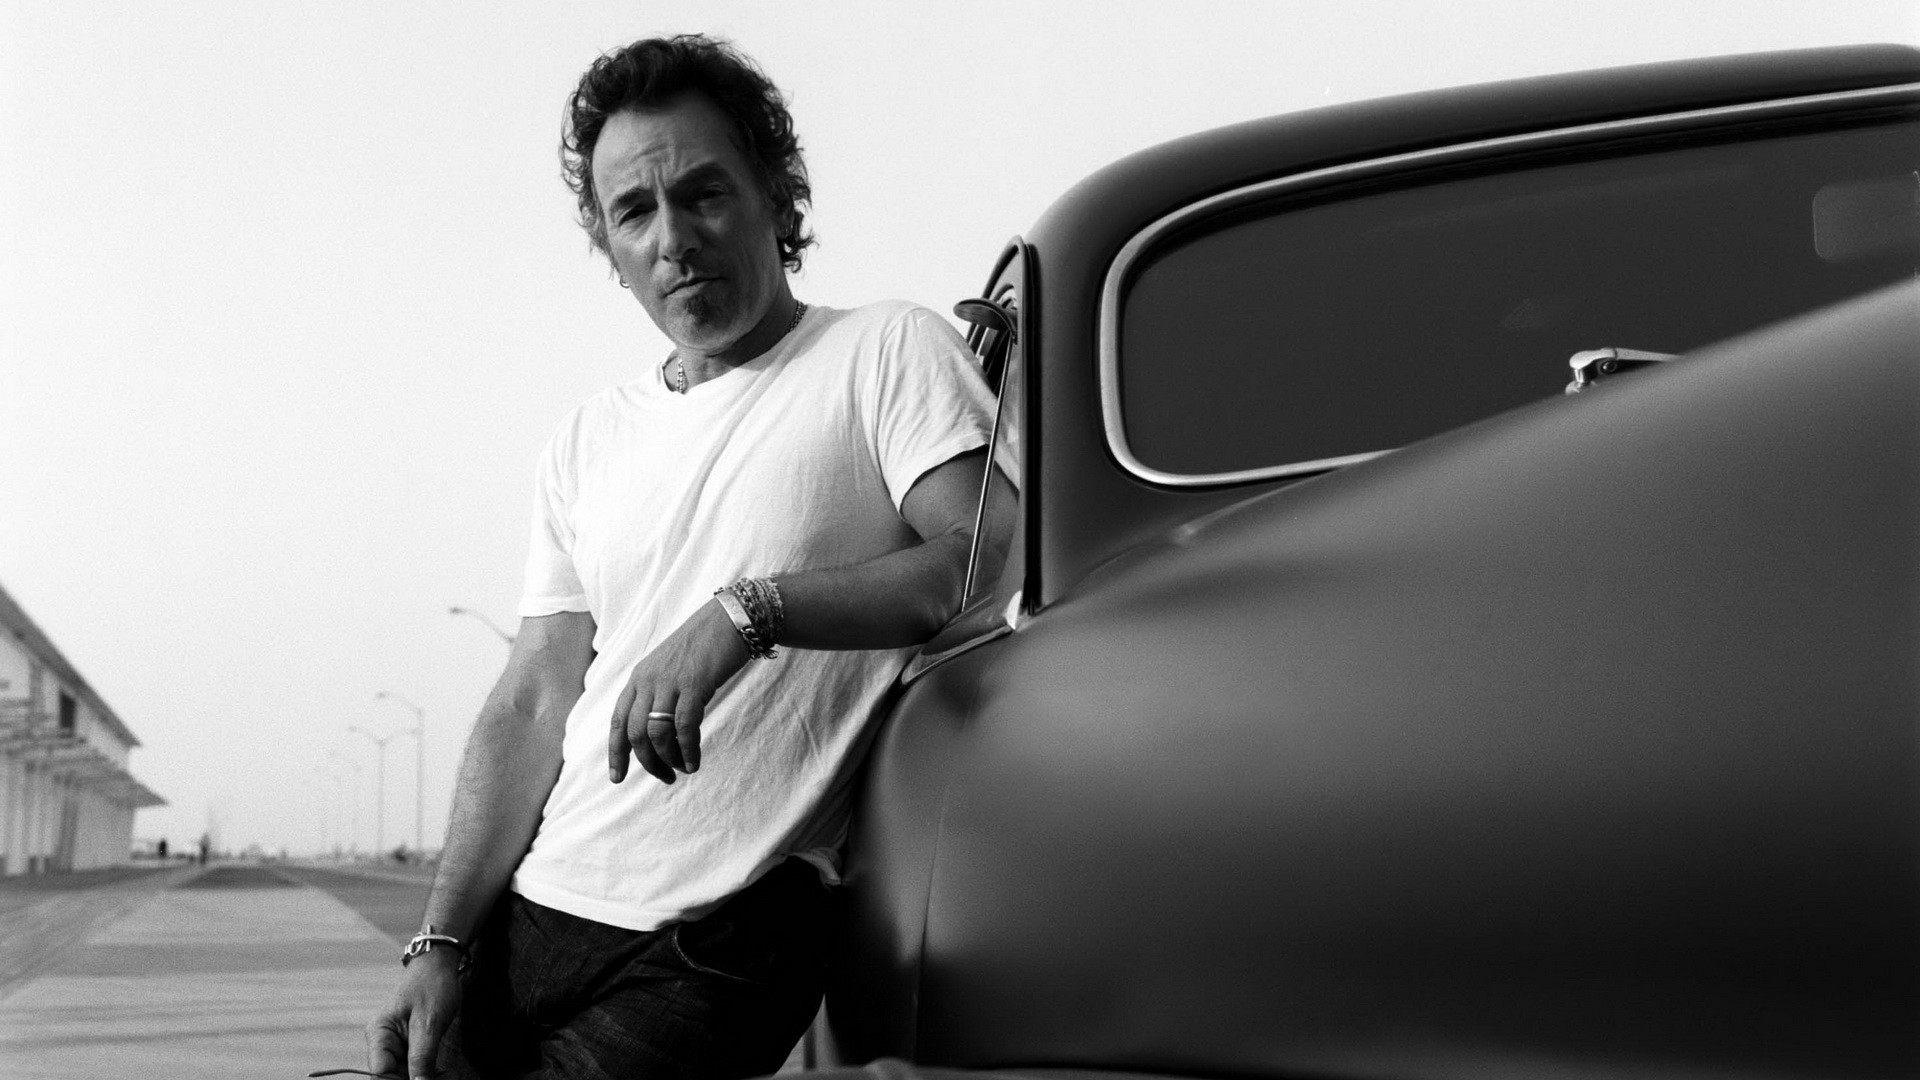 1920x1080 Bruce Springsteen: Reality Bruce Springsteen Images